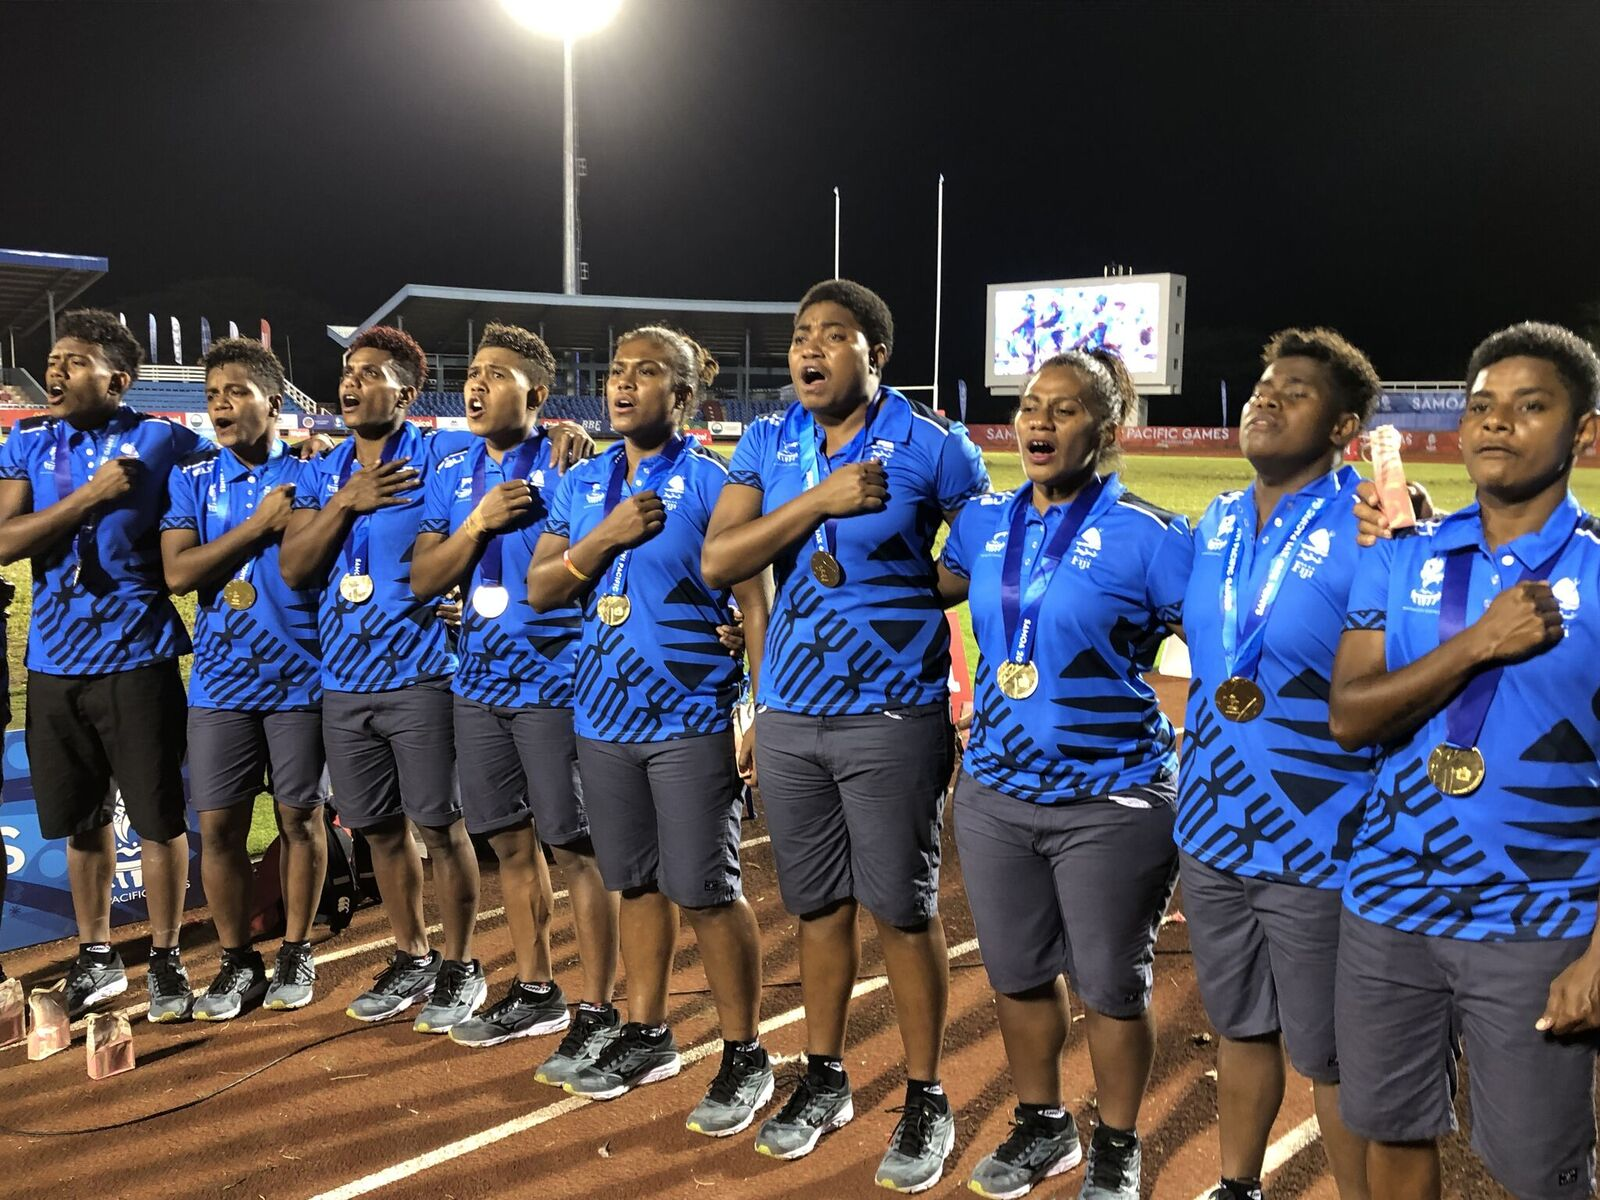 Fiji were the inaugural women's rugby league nines champions ©Pacific Games News Service